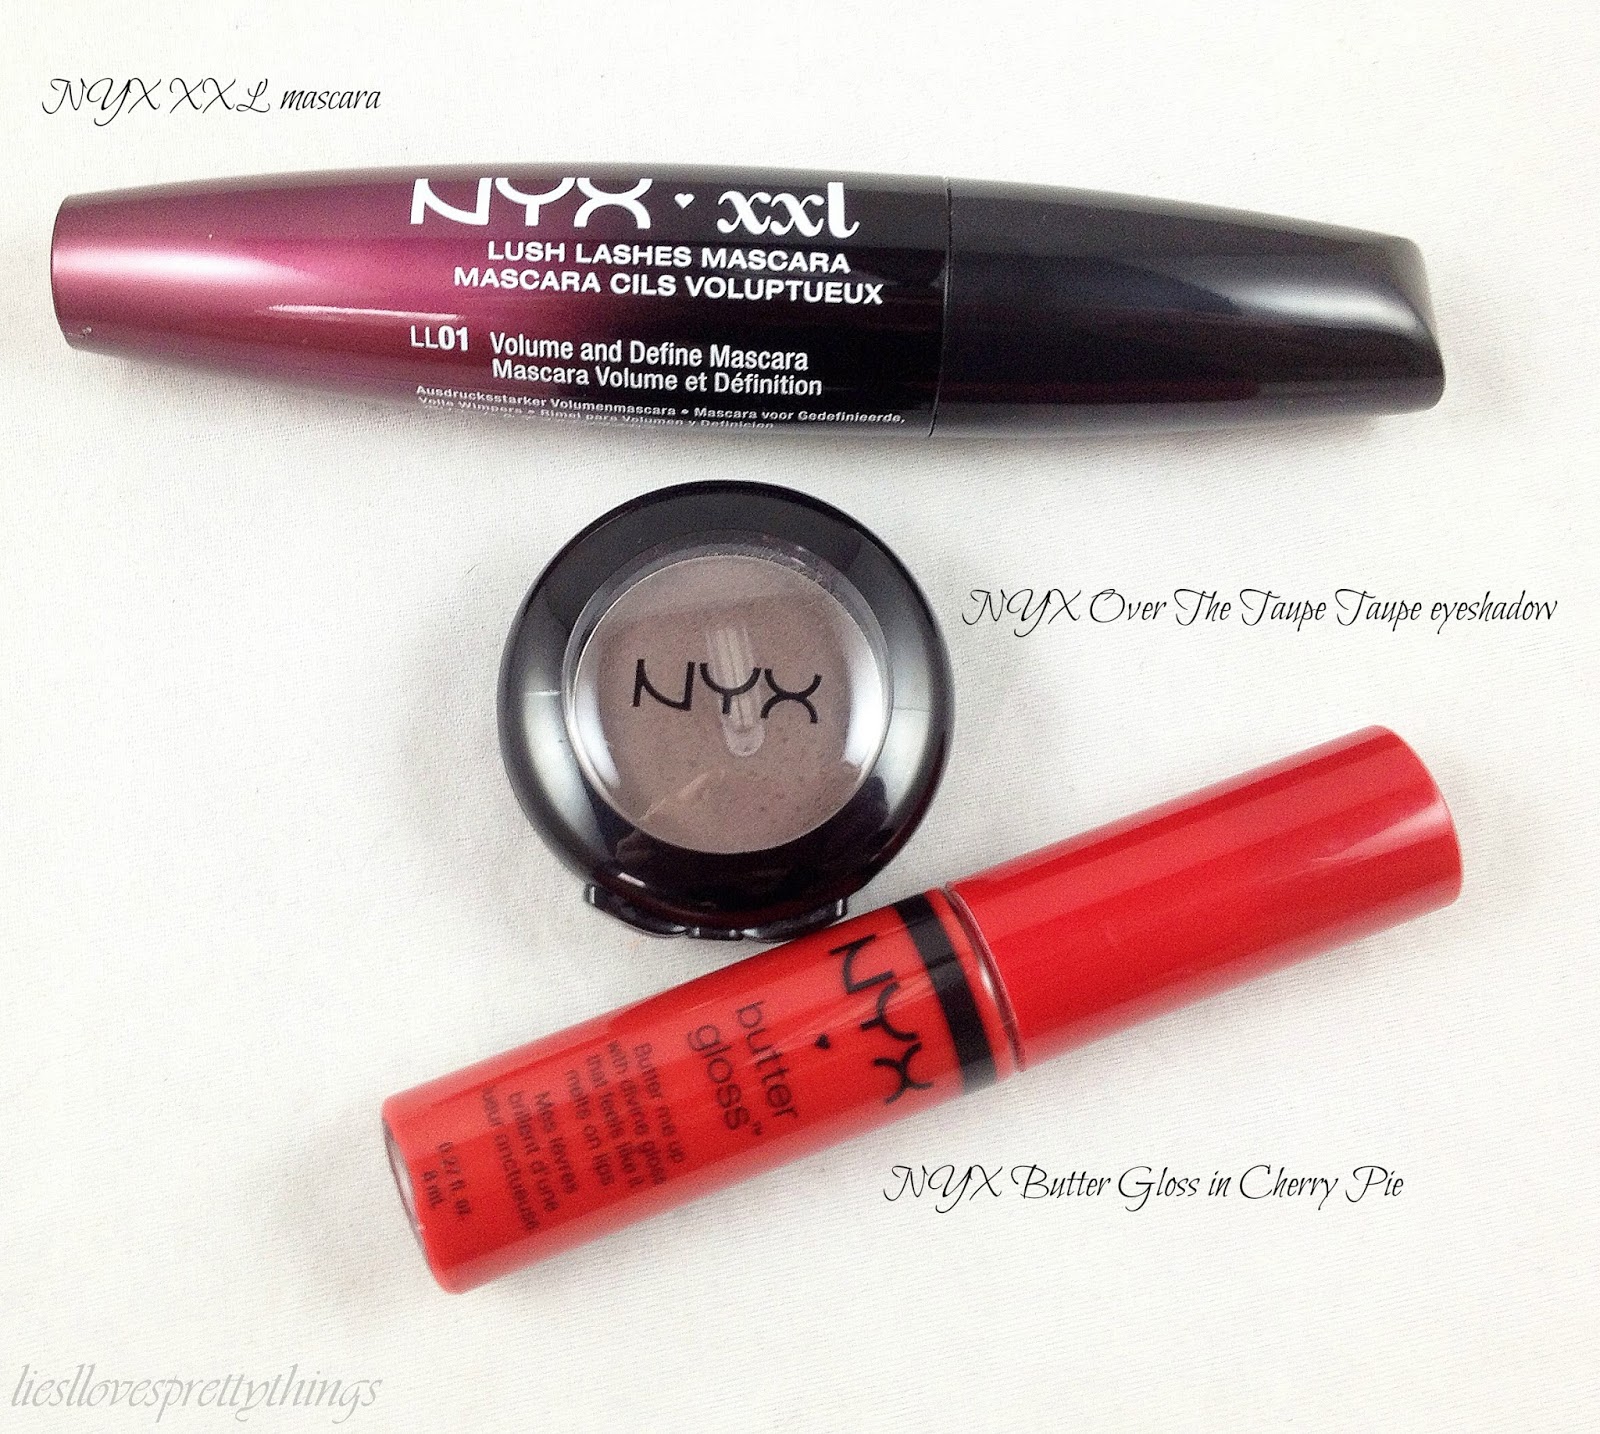 Doven Atomisk kun Liesl Loves Pretty Things: NYX Cosmetics Fall Mini Haul and Review